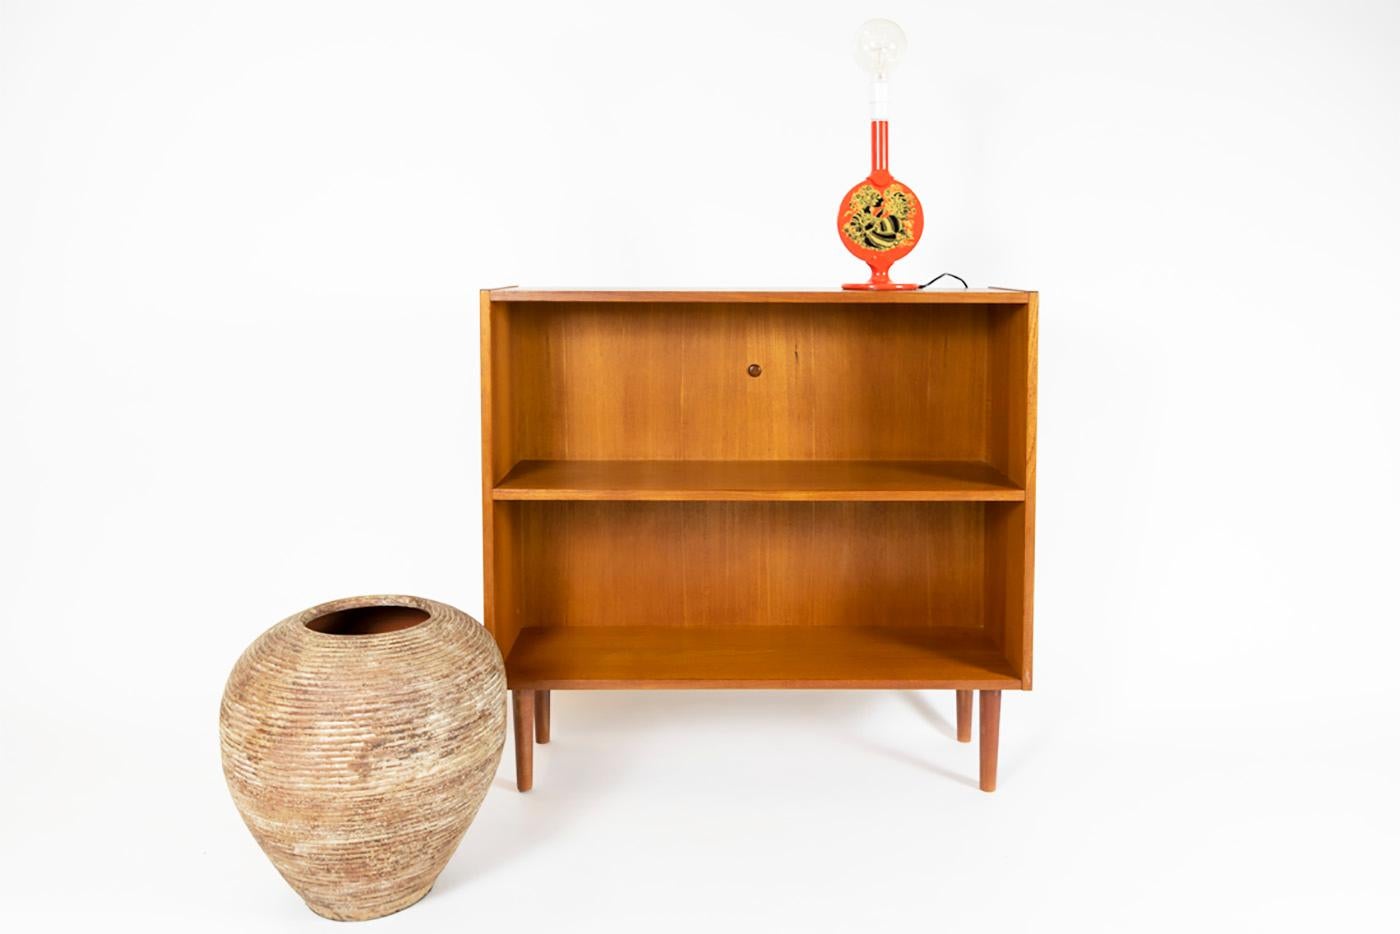 Beautiful bookcase made in teak and teak veneer in Denmark in the 1960s
Very nice vintage condition, ready to use.